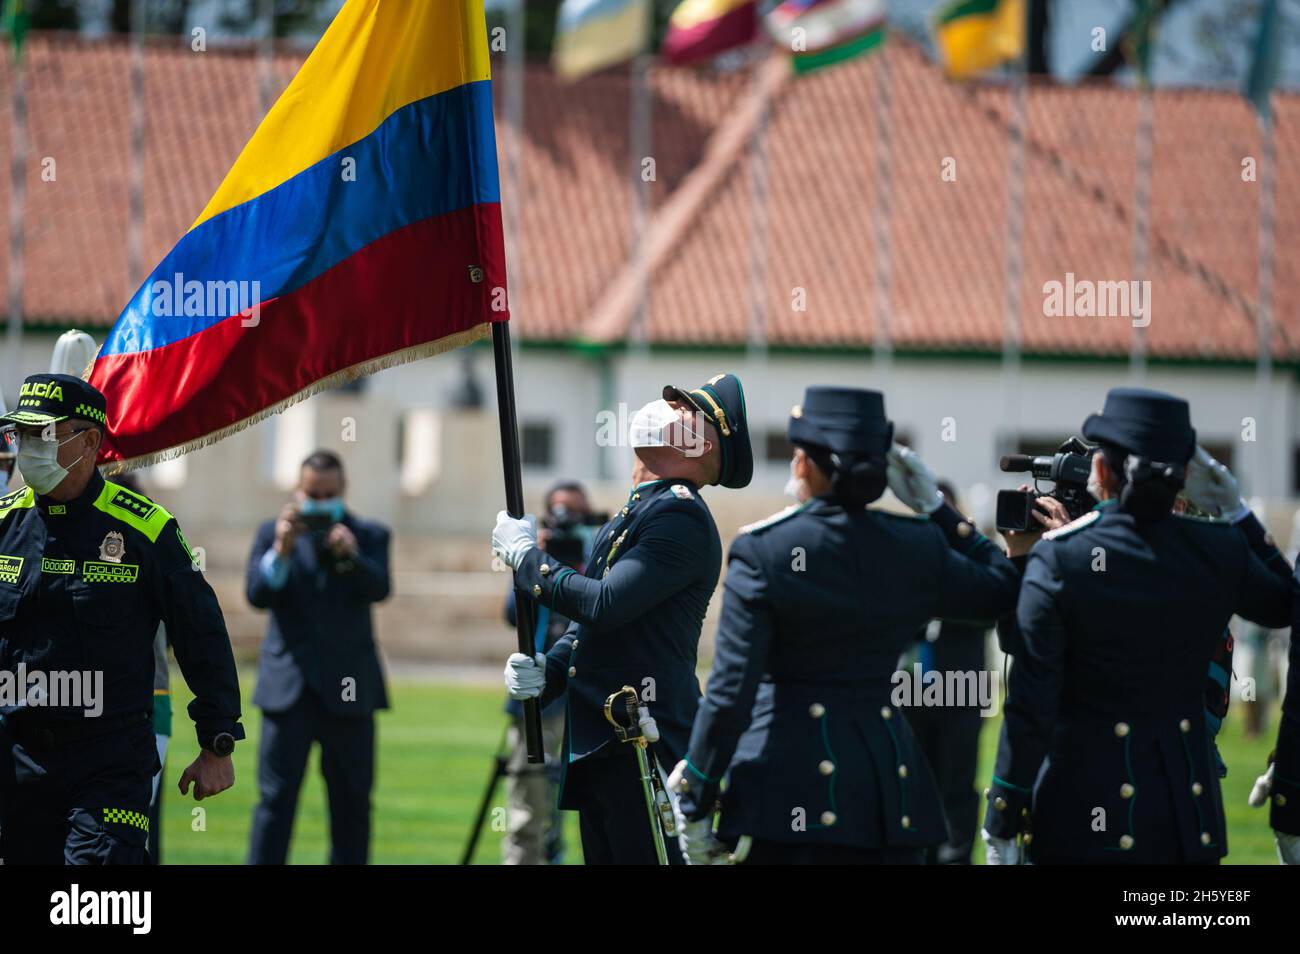 Bogota, Colombia. 11th Nov, 2021. Colombia's president Ivan Duque Marquez carries a Colombian flag and hands it to a officer during an event were Colombia's president Ivan Duque Marquez and Colombia's Minister of Defense Diego Molano in conmmemoration of the 130 anniversary of Colombia's National Police and the promotion to officers to more than a 100 police members, in Bogota, Colombia on November 11, 2021. Credit: Long Visual Press/Alamy Live News Stock Photo